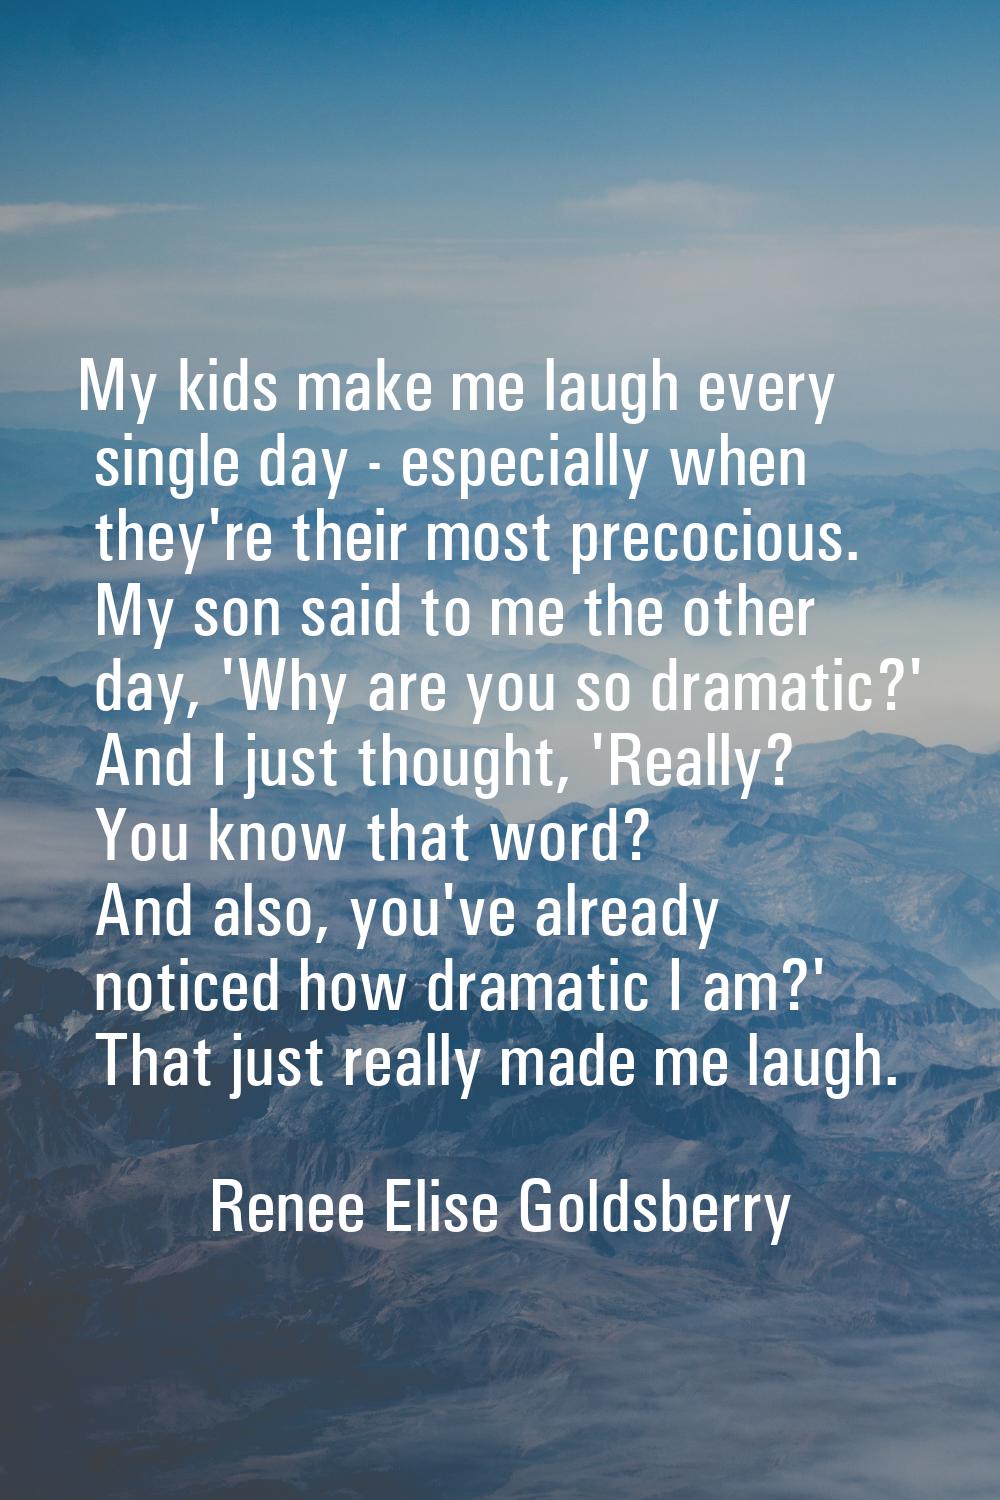 My kids make me laugh every single day - especially when they're their most precocious. My son said